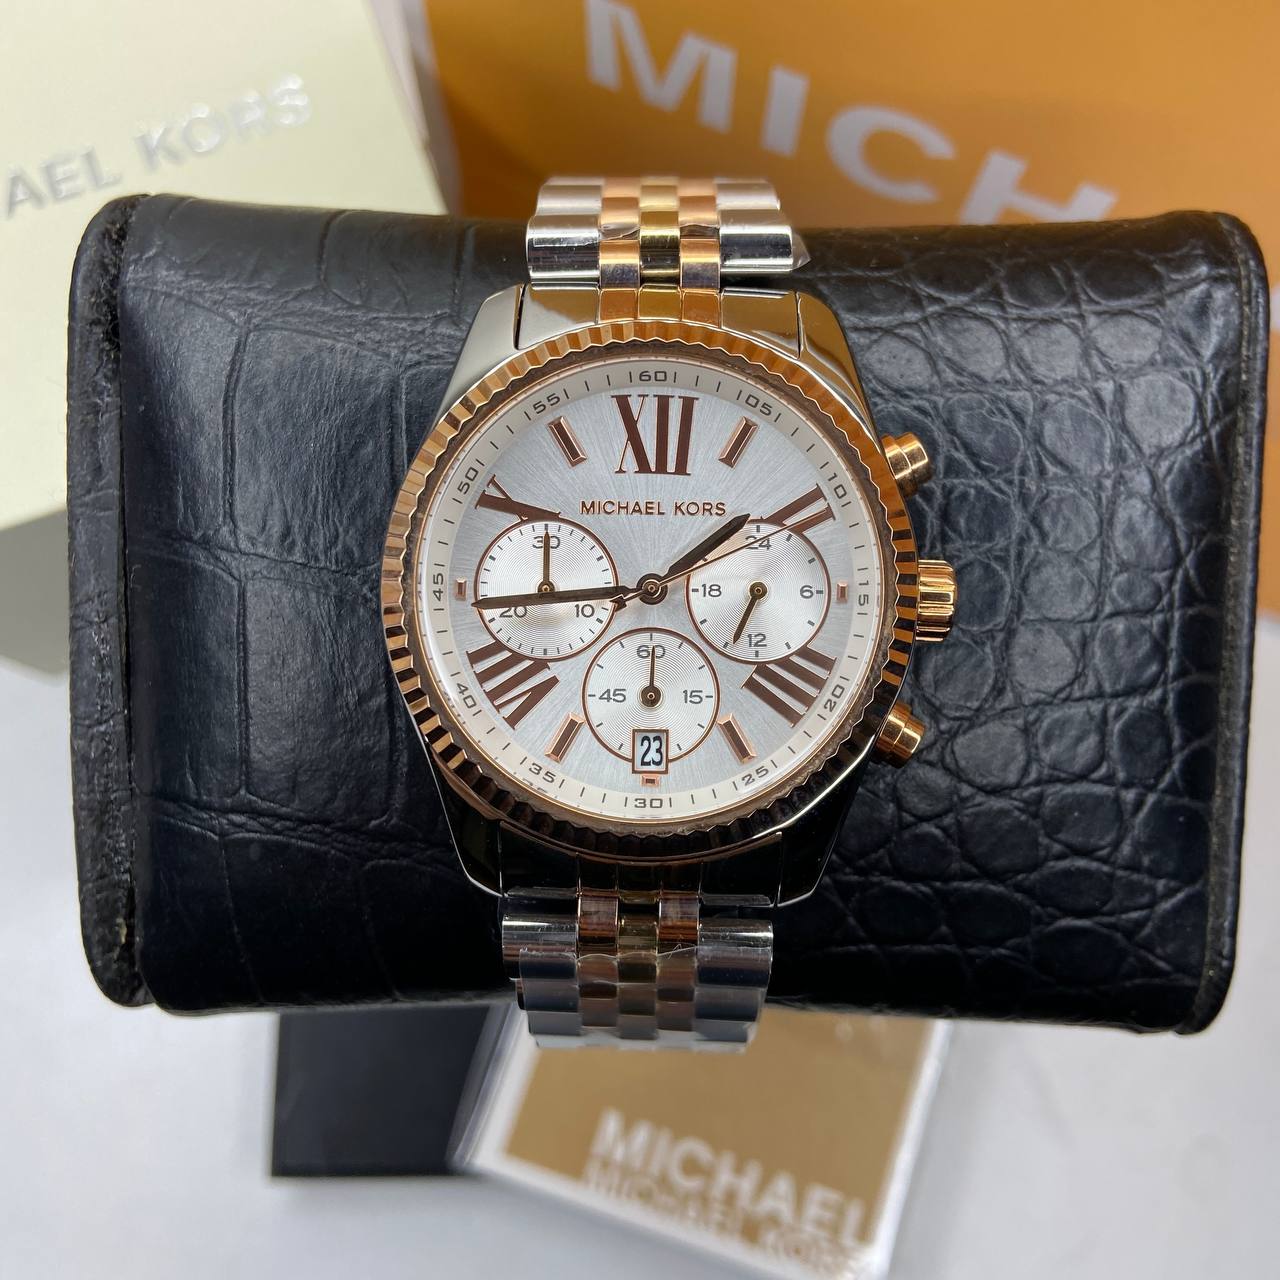 MICHAEL KORS Chronograph Silver Dial Rosegold Stainless Steel Watch MK5735 Unisex